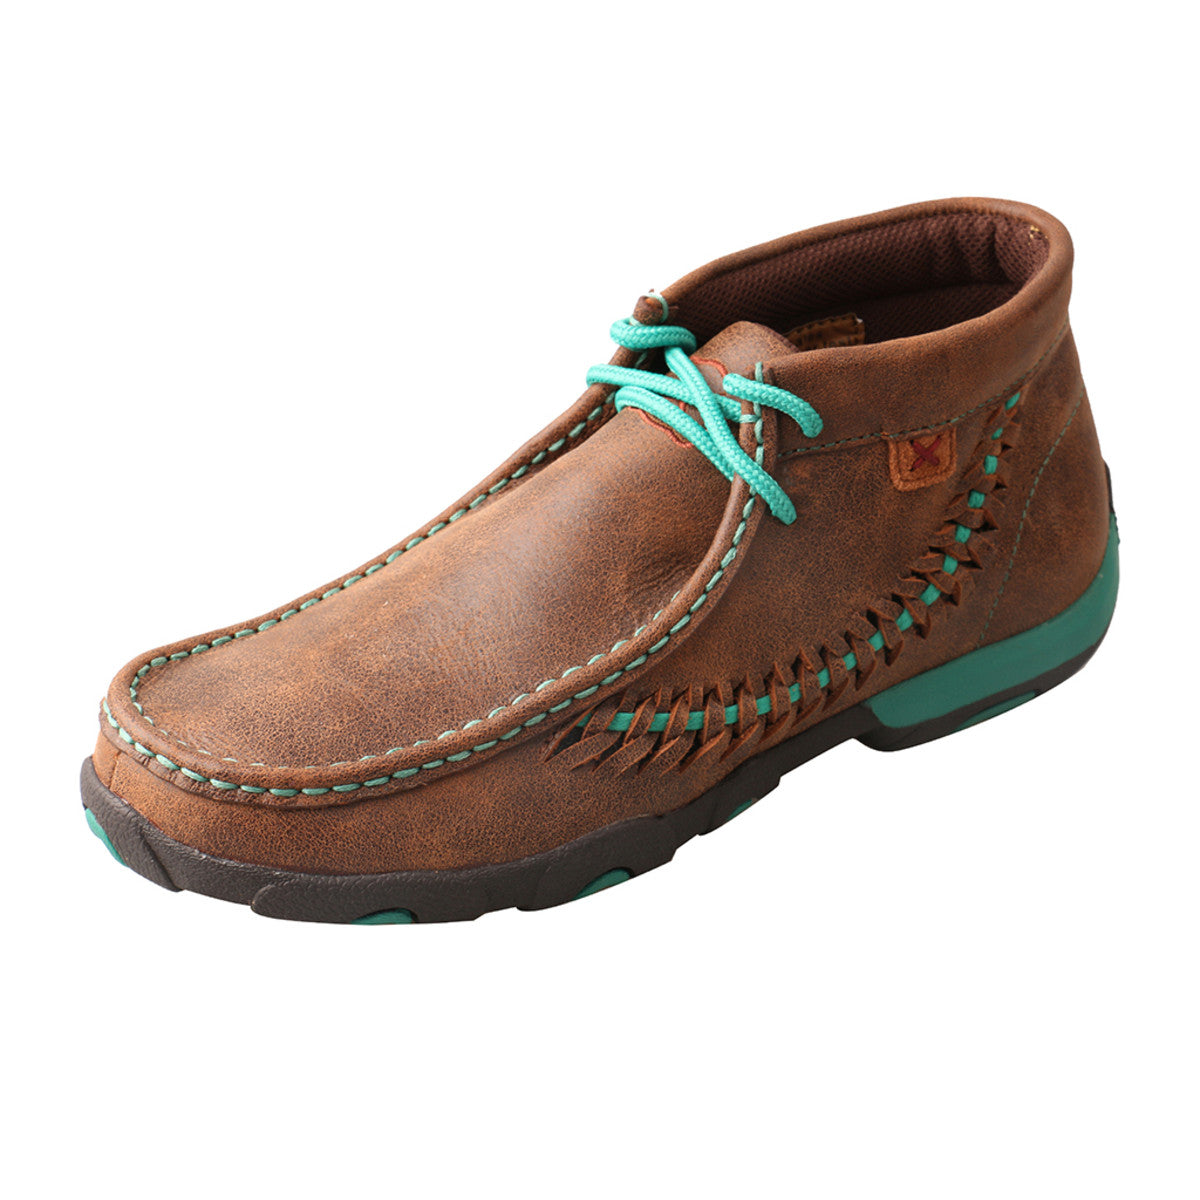 Women's Twisted X Original Chukka Driving Moccasins Shoe in Brown & Turquoise from the side view